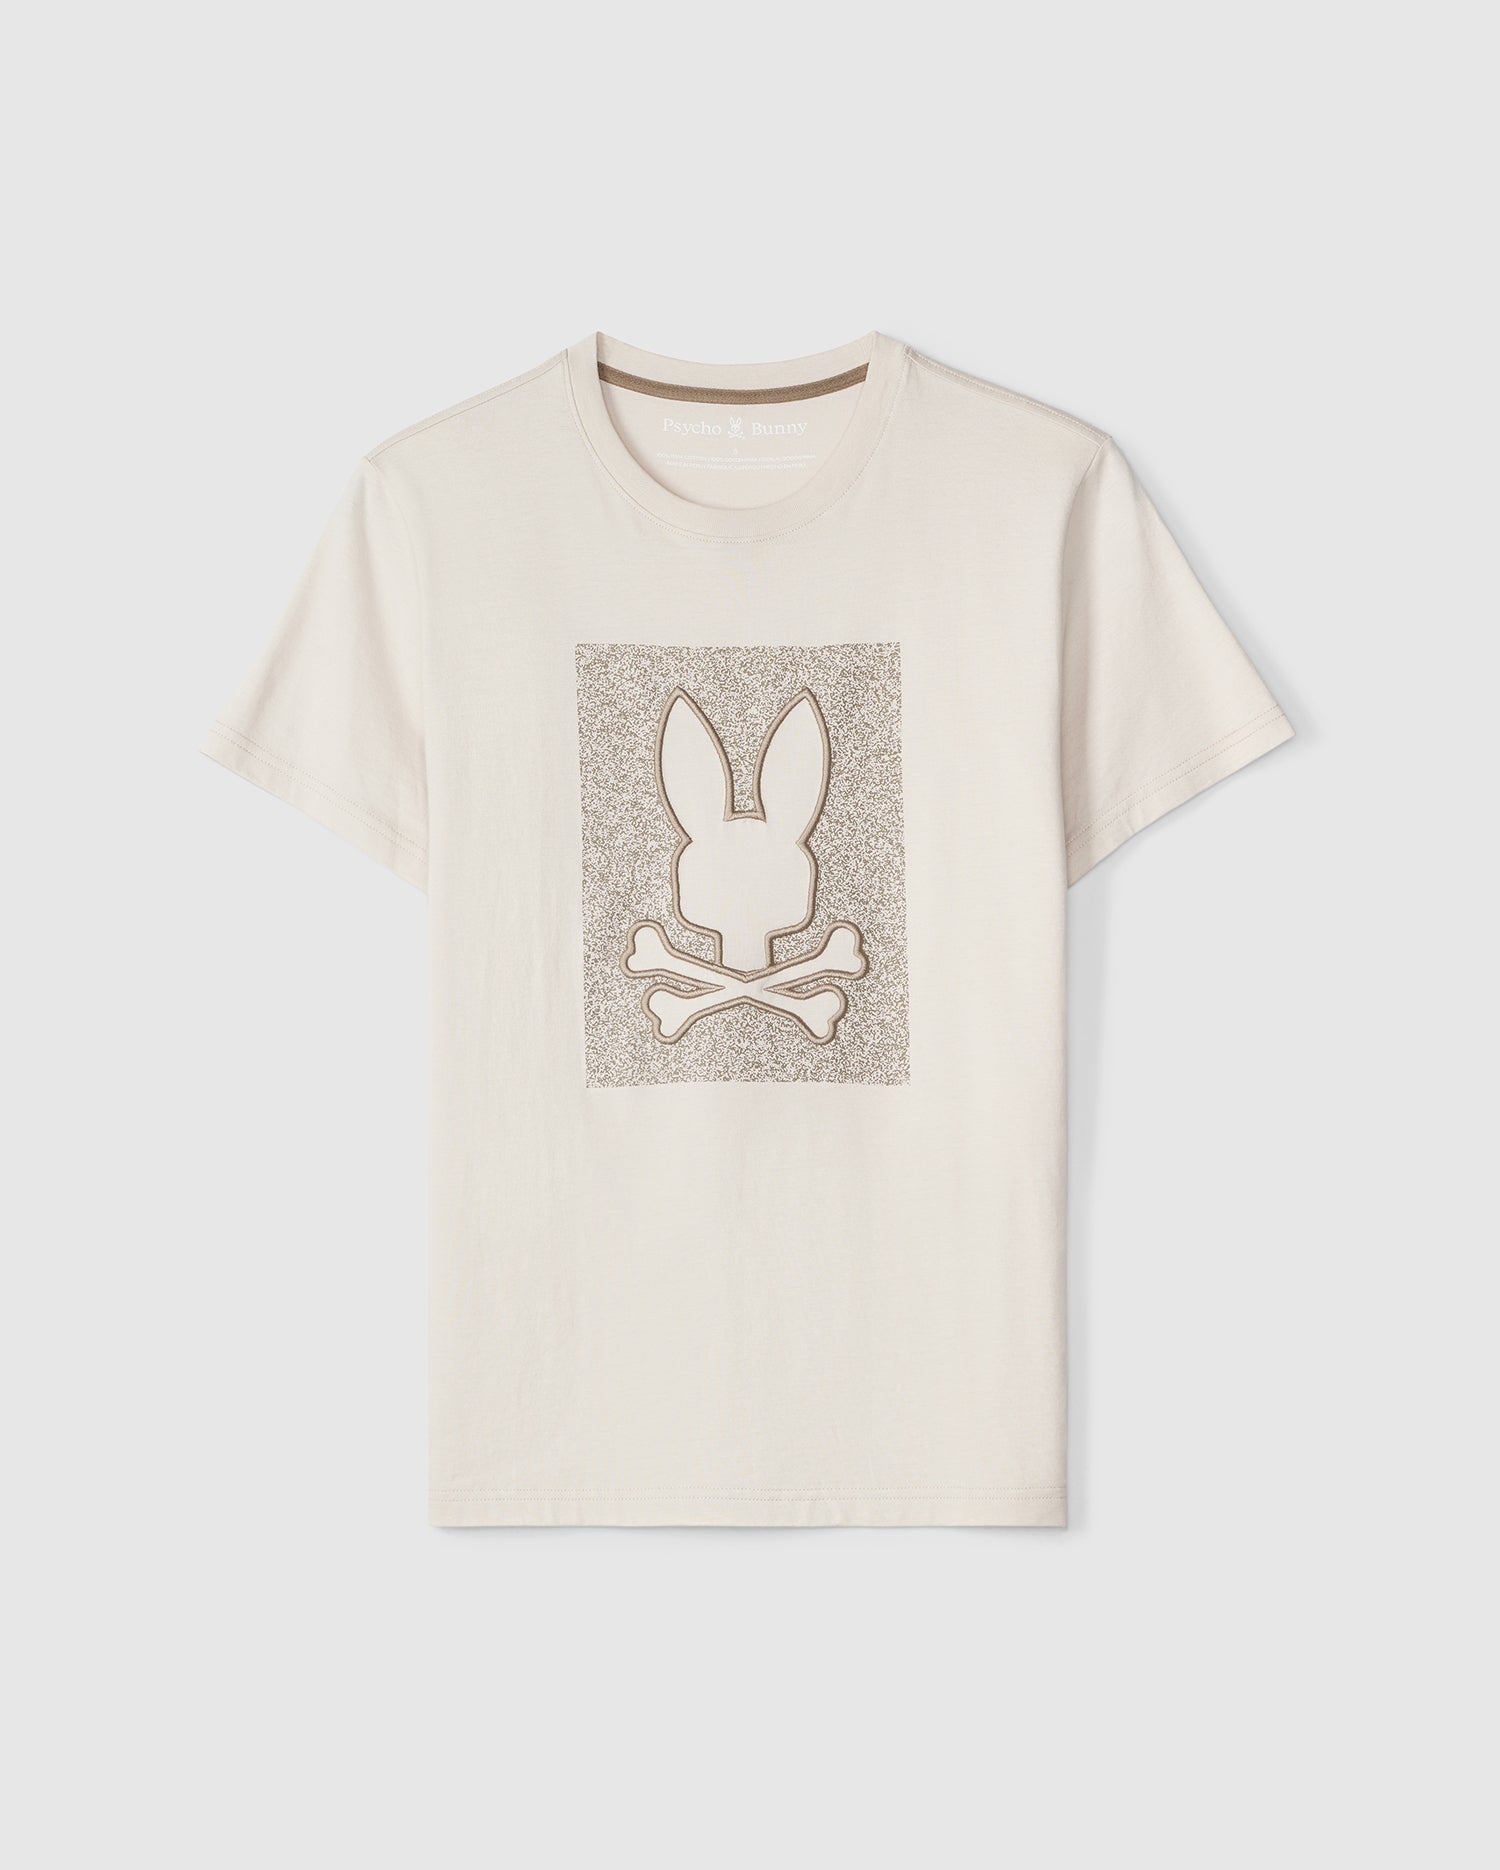 A plain light beige Psycho Bunny Livingston tee featuring a centered embroidered Bunny design of a stylized white rabbit head over crossbones, all set within a textured silver square background.